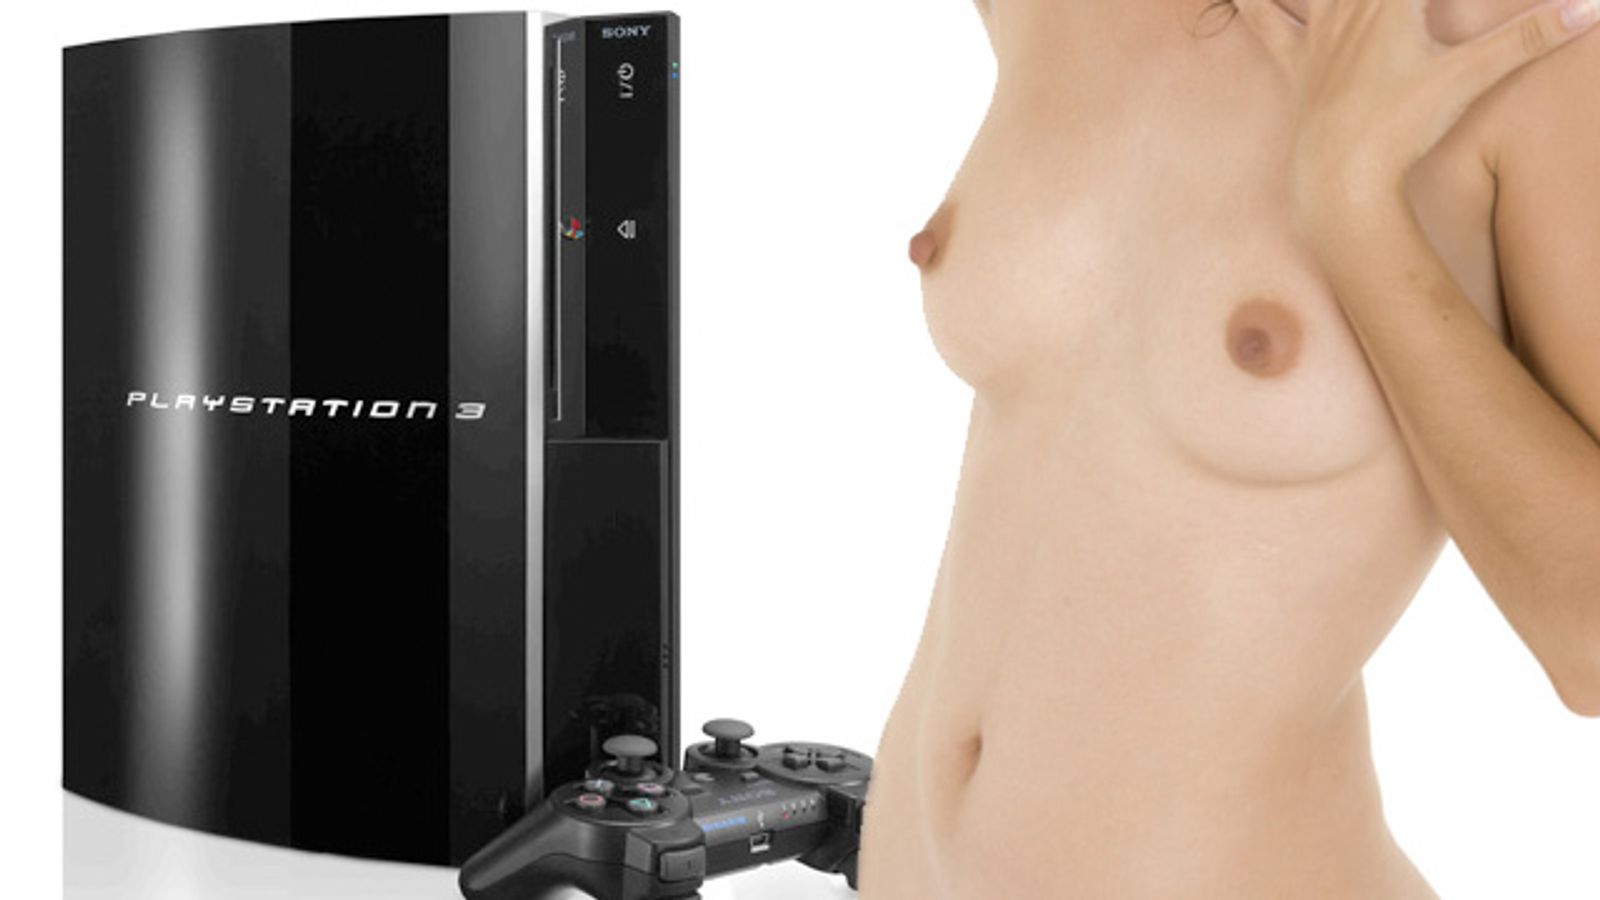 aaron lenk recommends streaming porn on ps3 pic